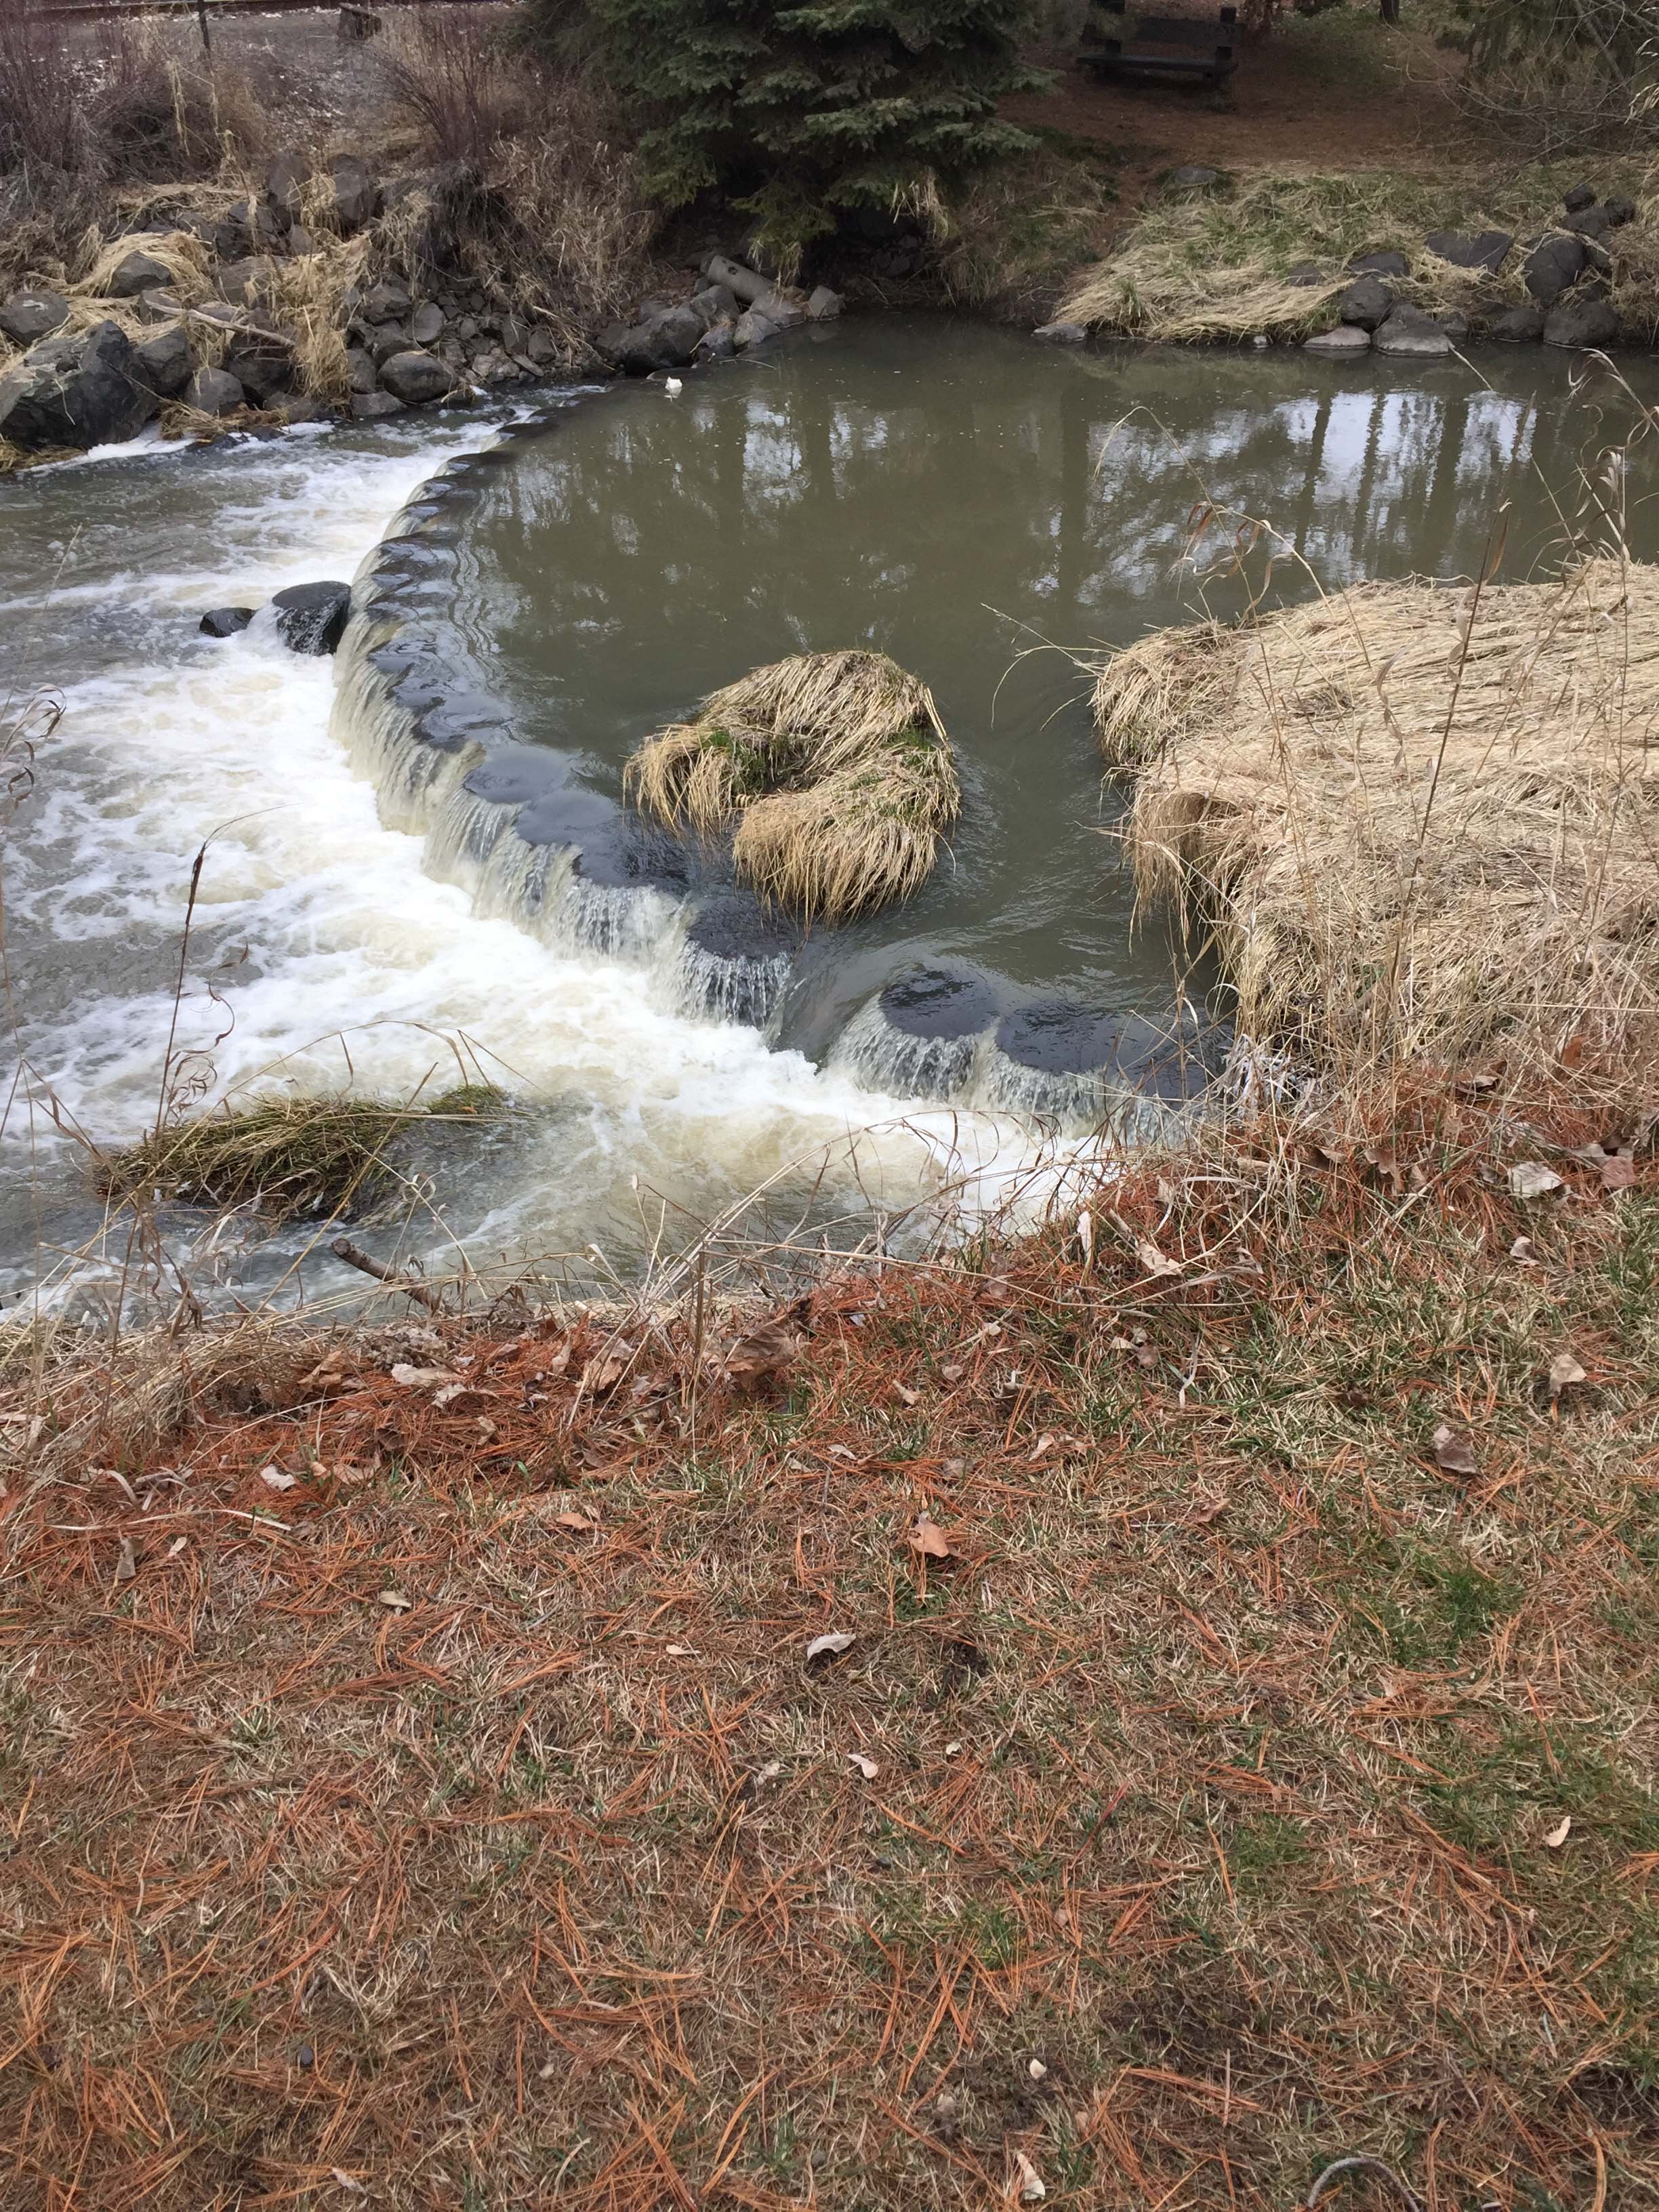 View of the check dam at Reaney Park, taken February 2018.